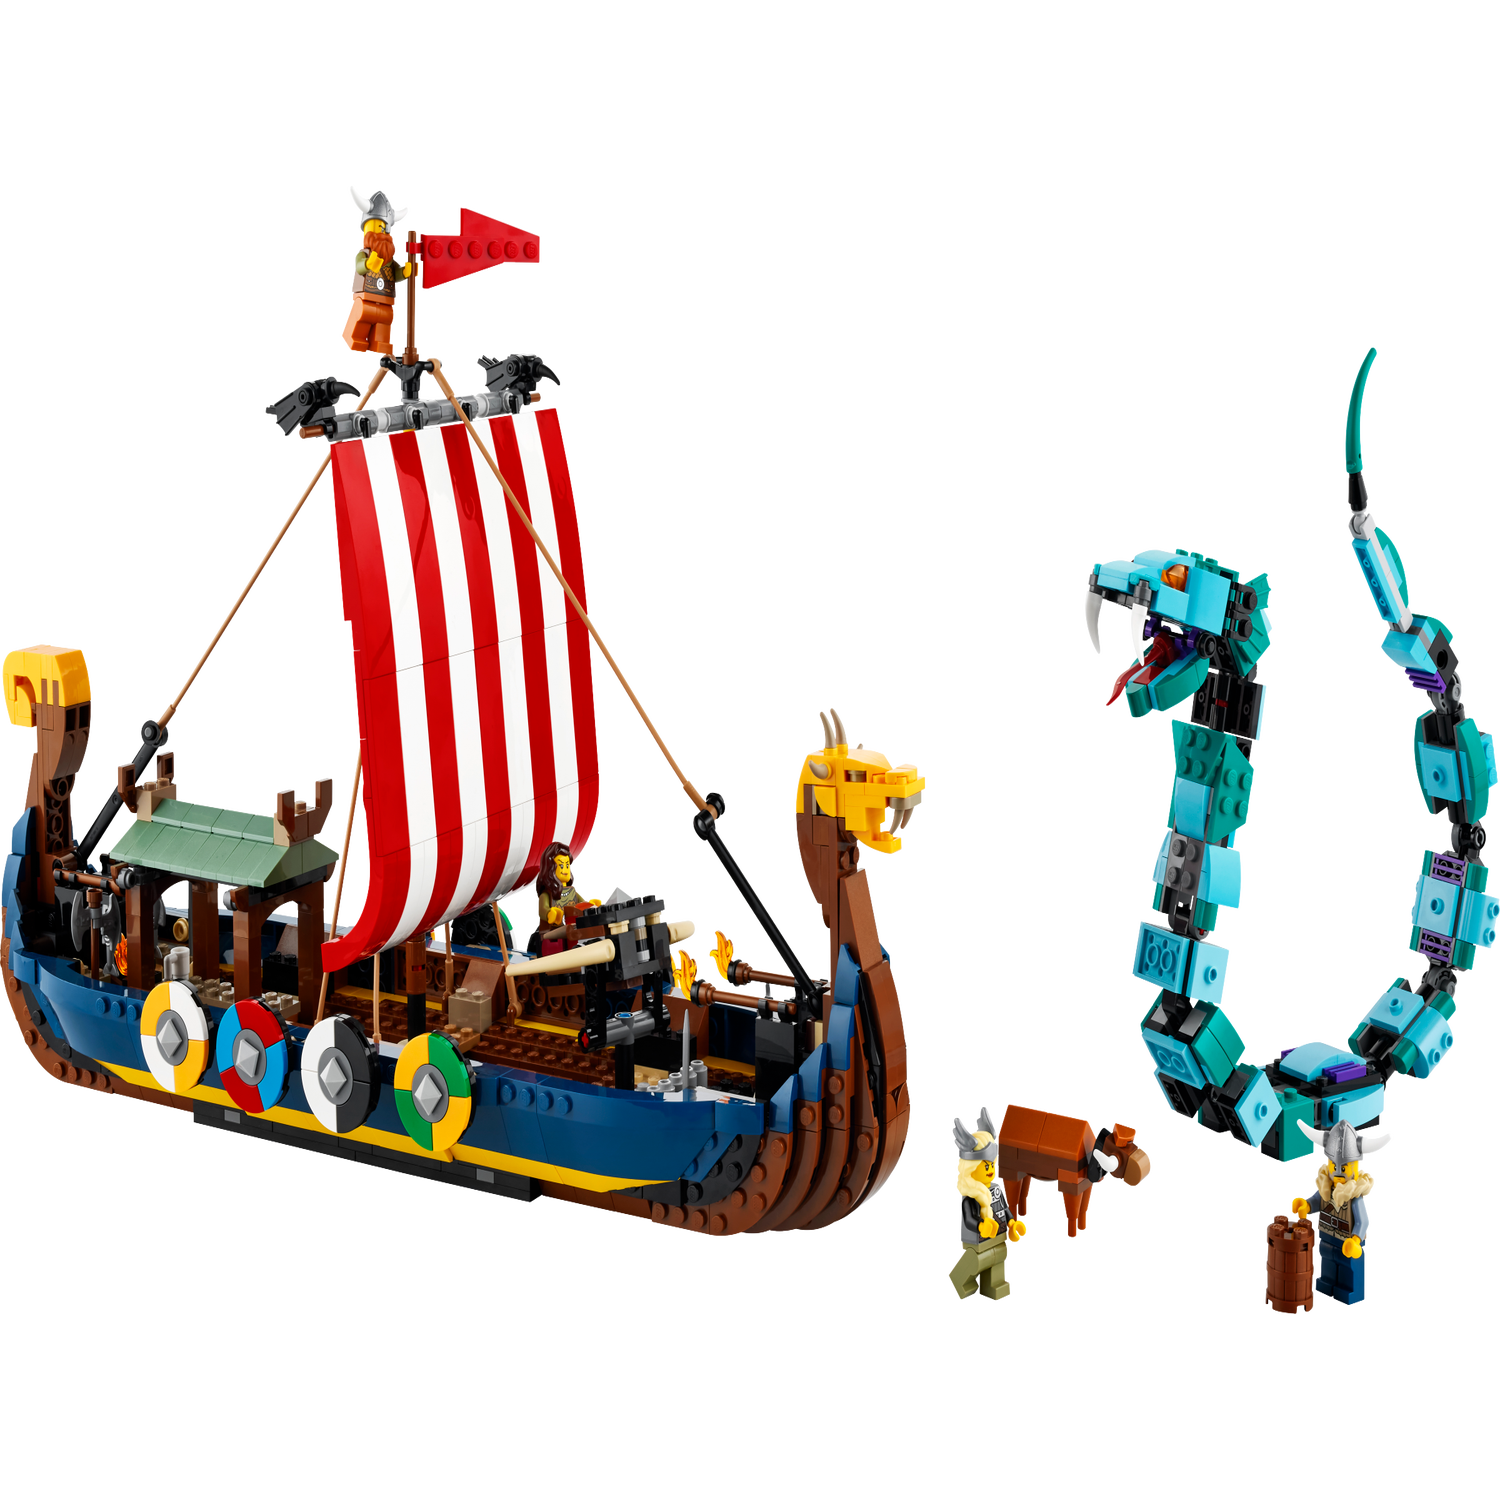 Roman goochelaar jaloezie Viking Ship and the Midgard Serpent 31132 | Creator 3-in-1 | Buy online at  the Official LEGO® Shop US